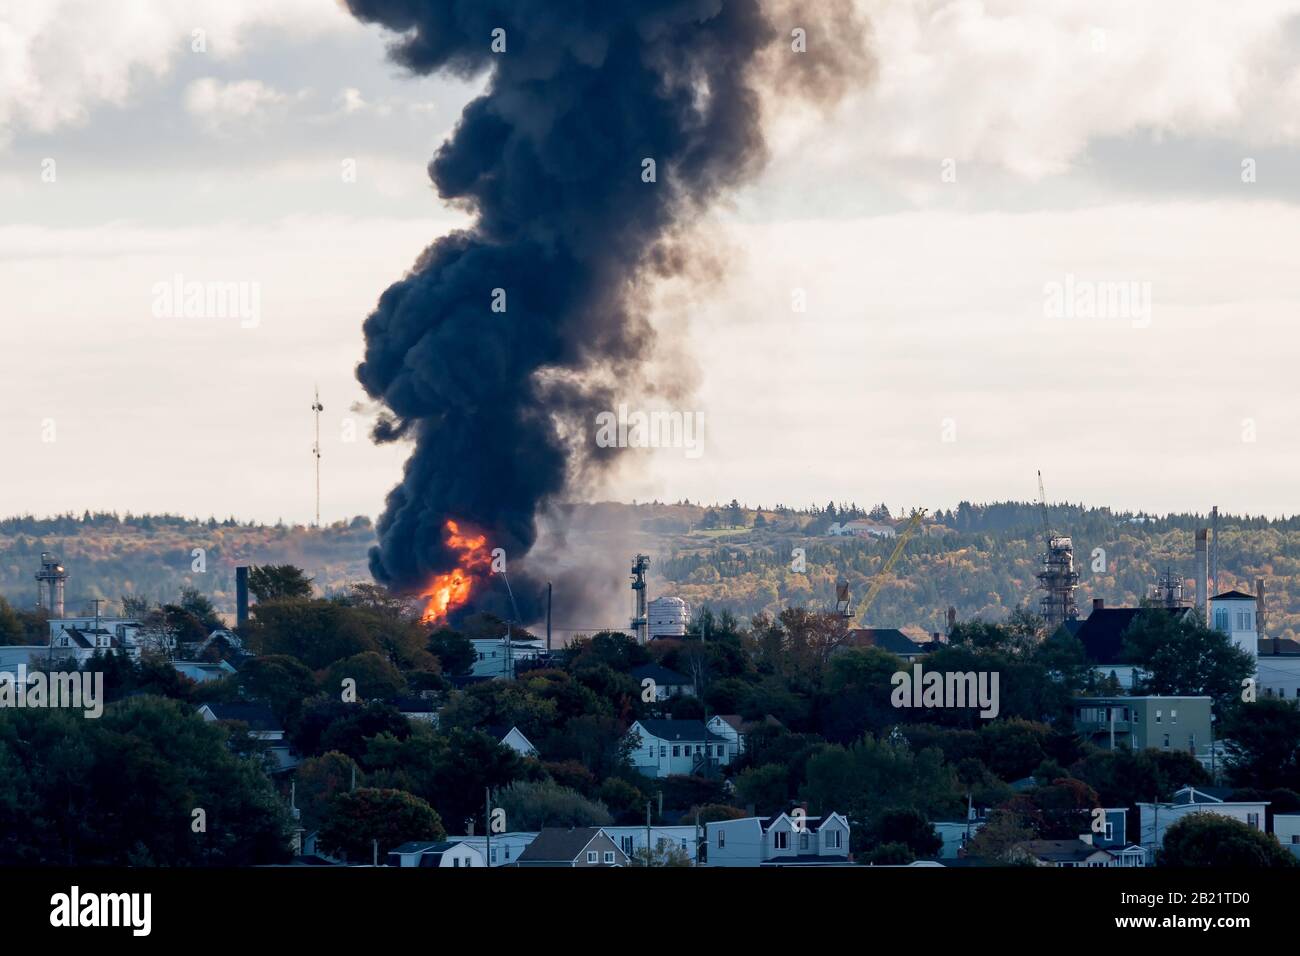 Large fire at an oil refinery seen from a distance. Only parts of the refinery visible behind the trees. Thick black smoke rises from the flames. Stock Photo